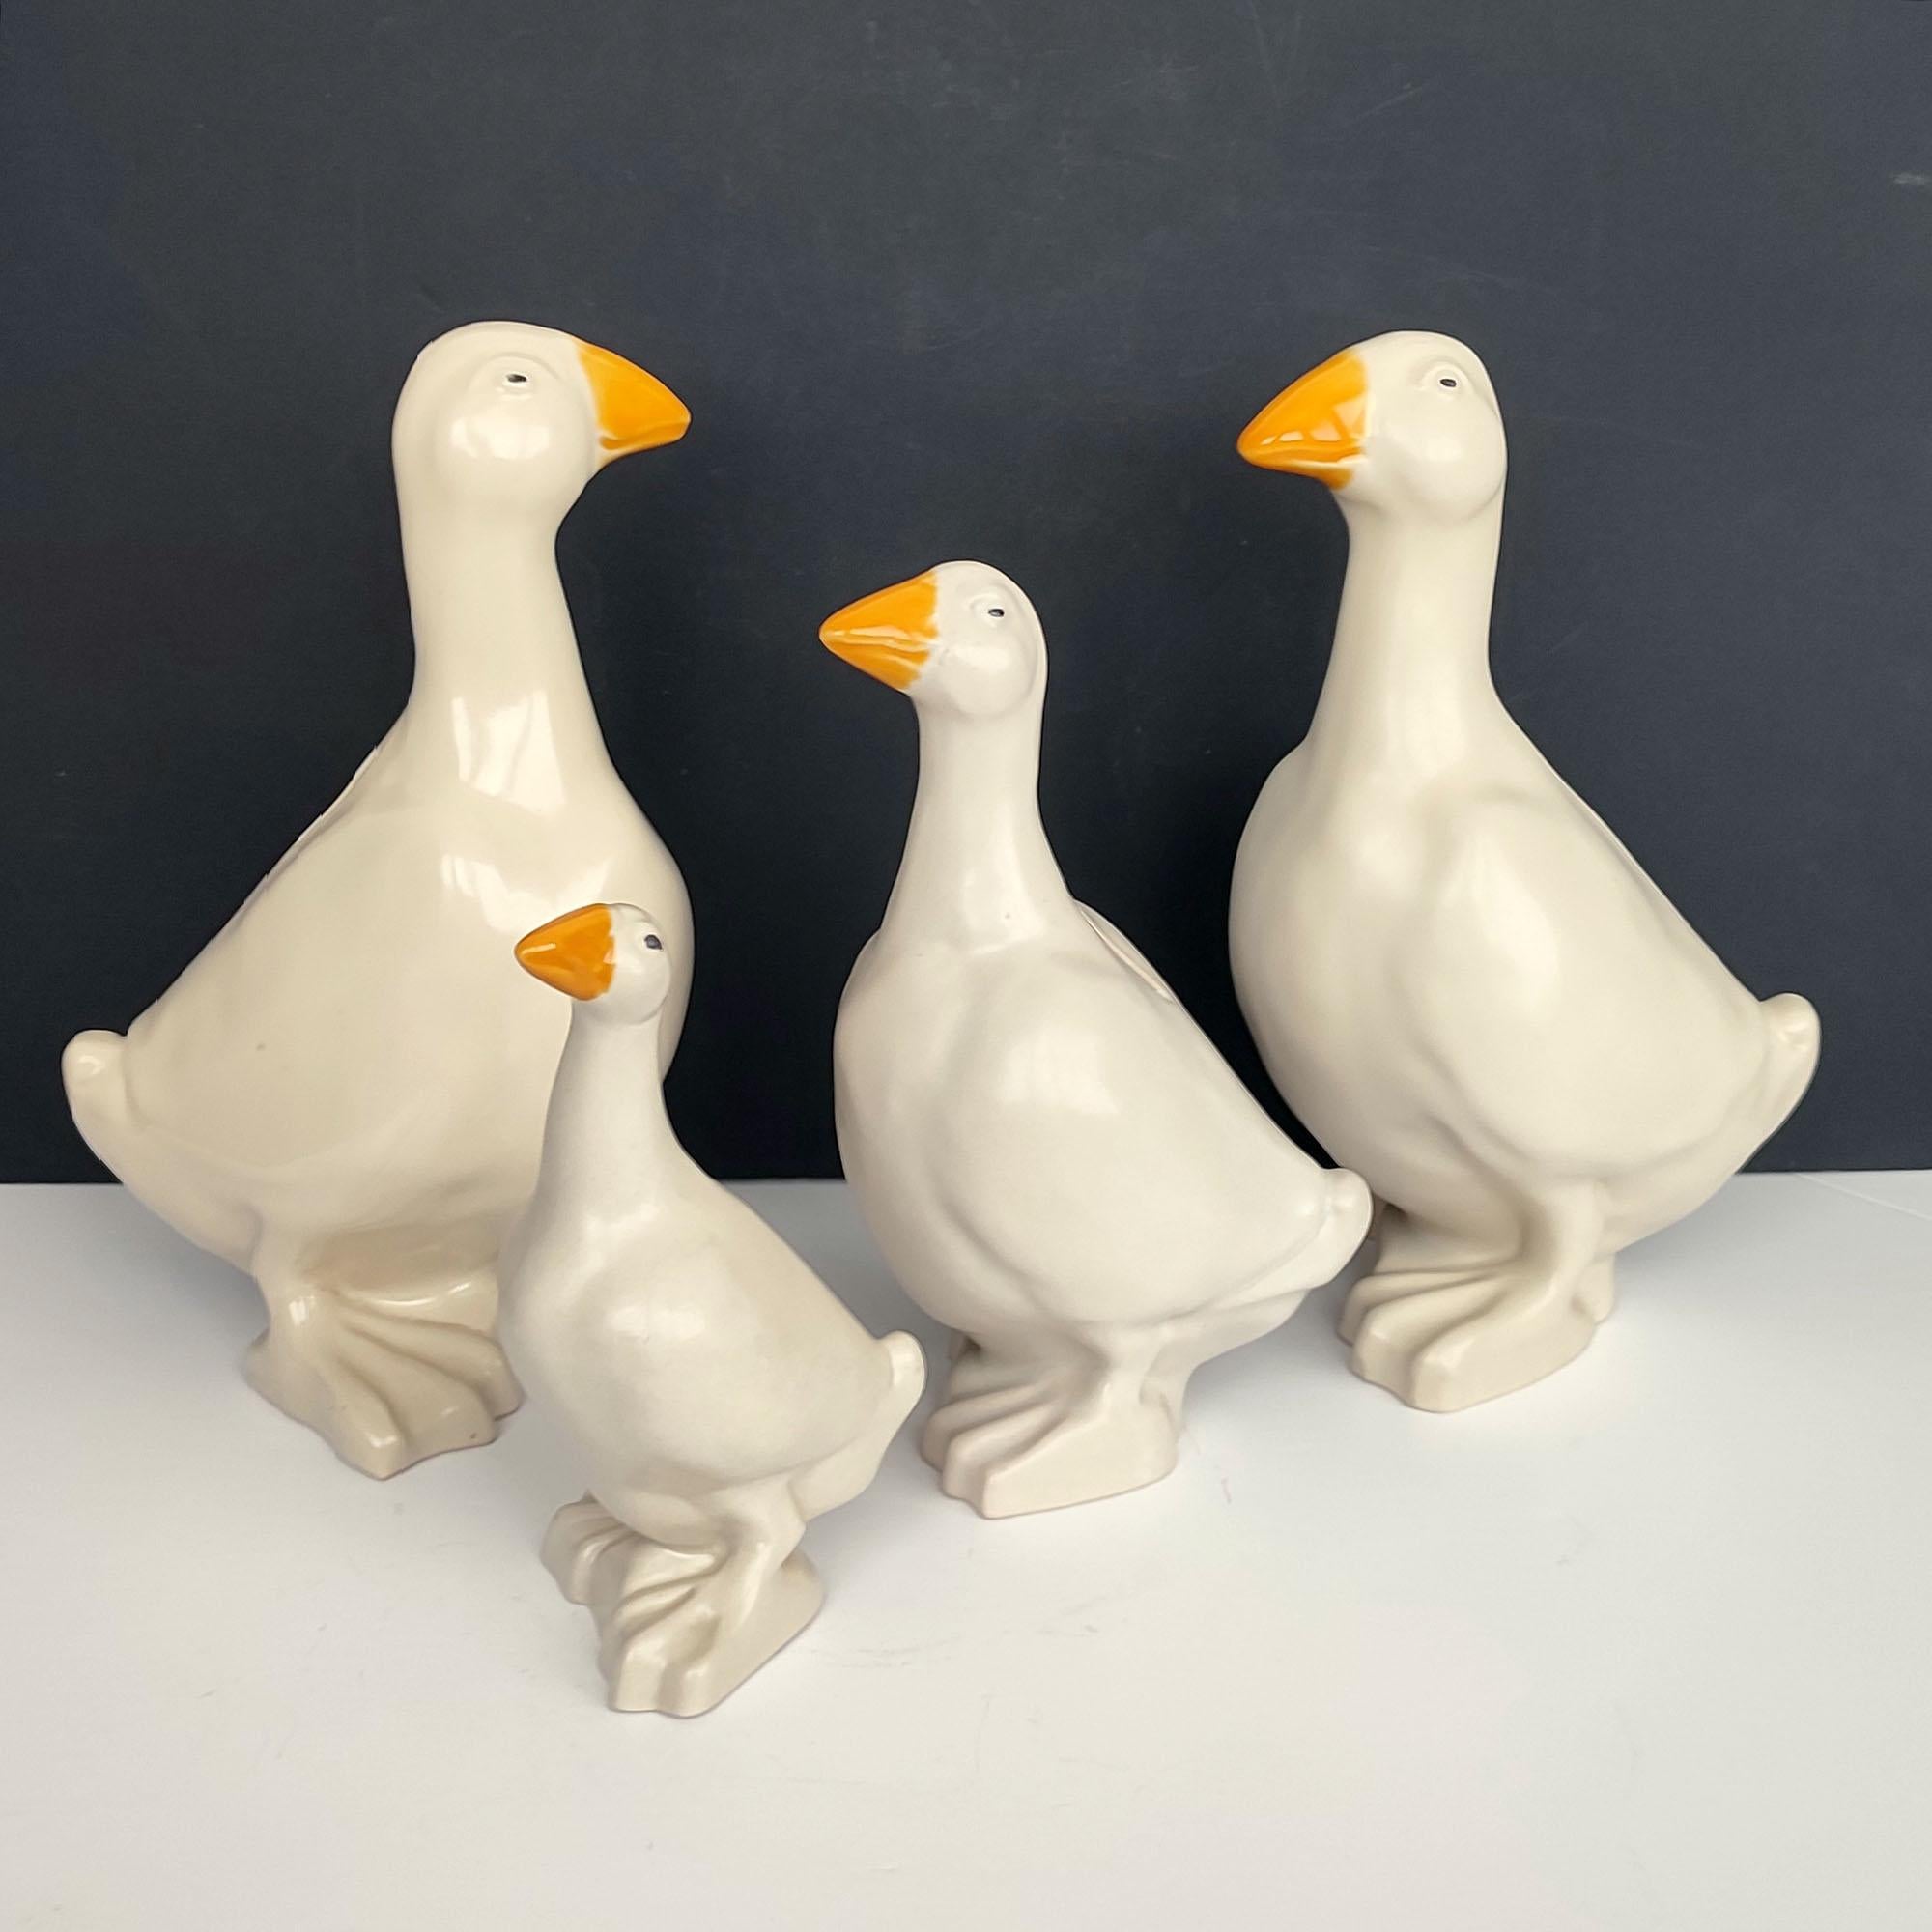 Set of Four Scandinavian ceramic goose money banks, Höganäs Keramik Sweden 1990s. Each marked under the bottom with maker's marks, and some dated. One key available for all. Satin glaze on bodies with glossy orange glaze on beaks. Very good over all